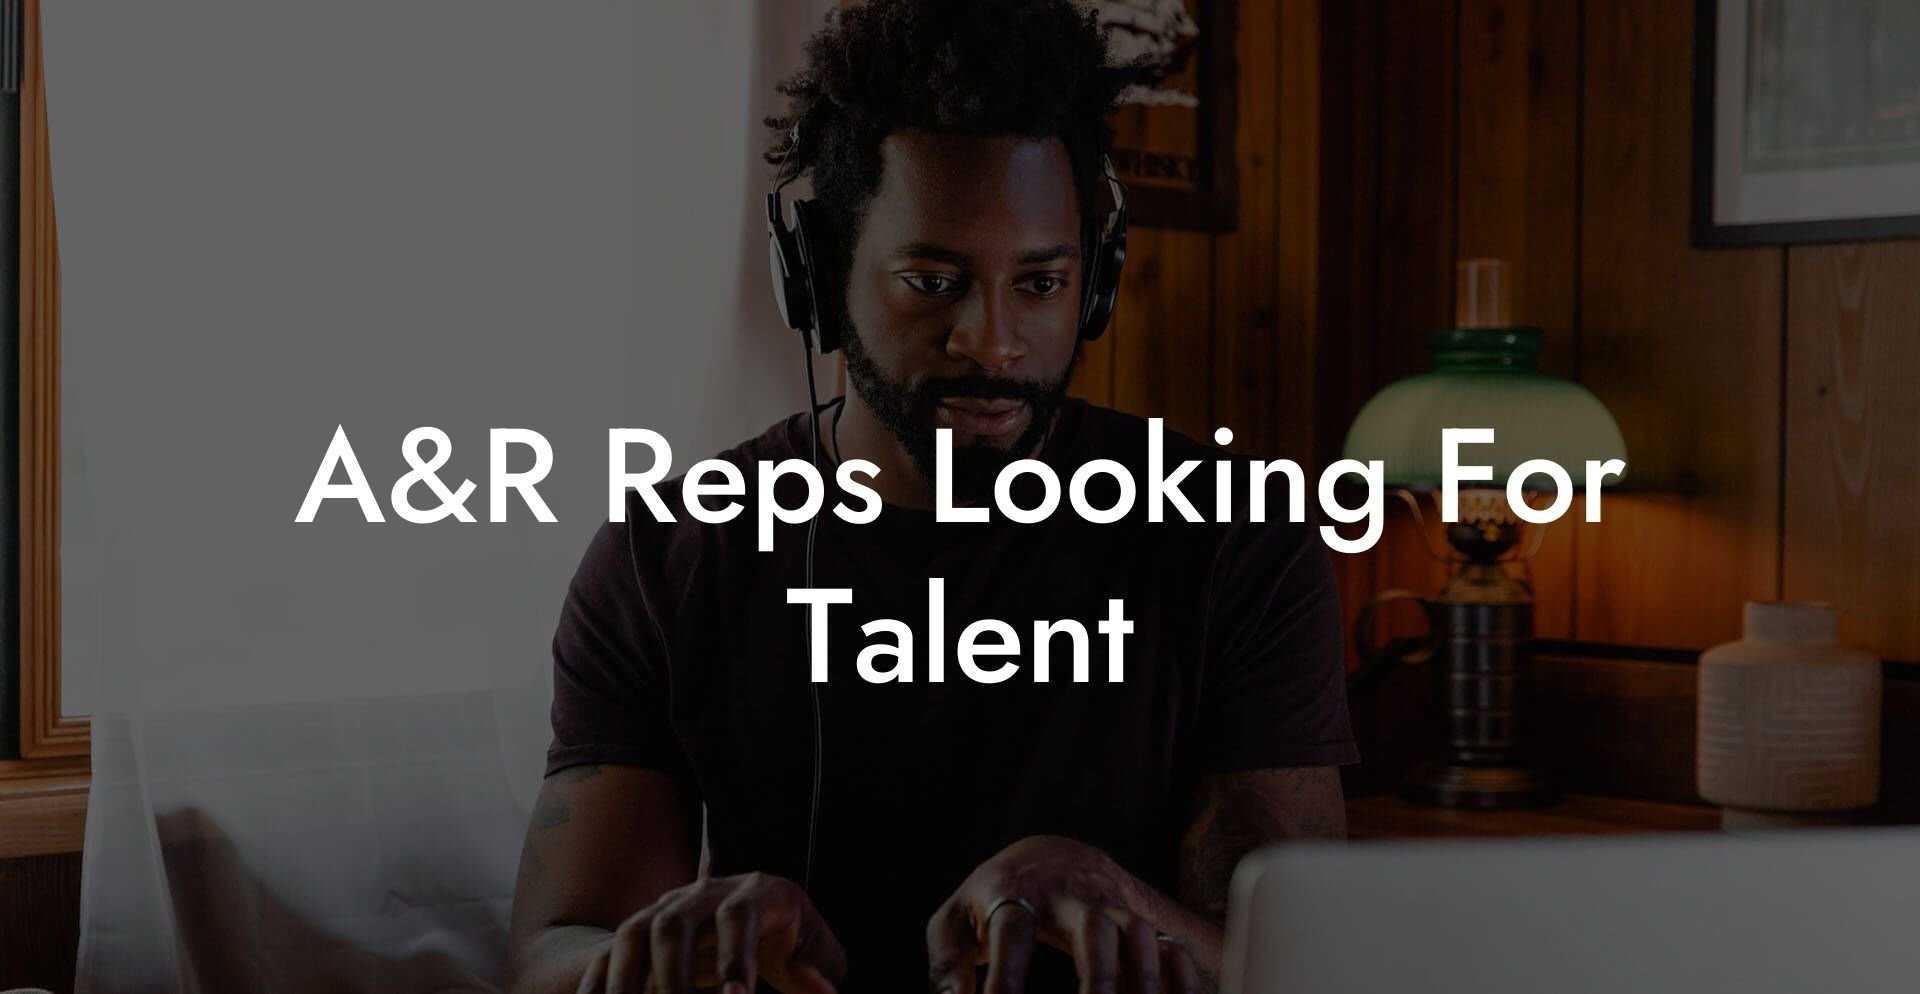 A&R Reps Looking For Talent